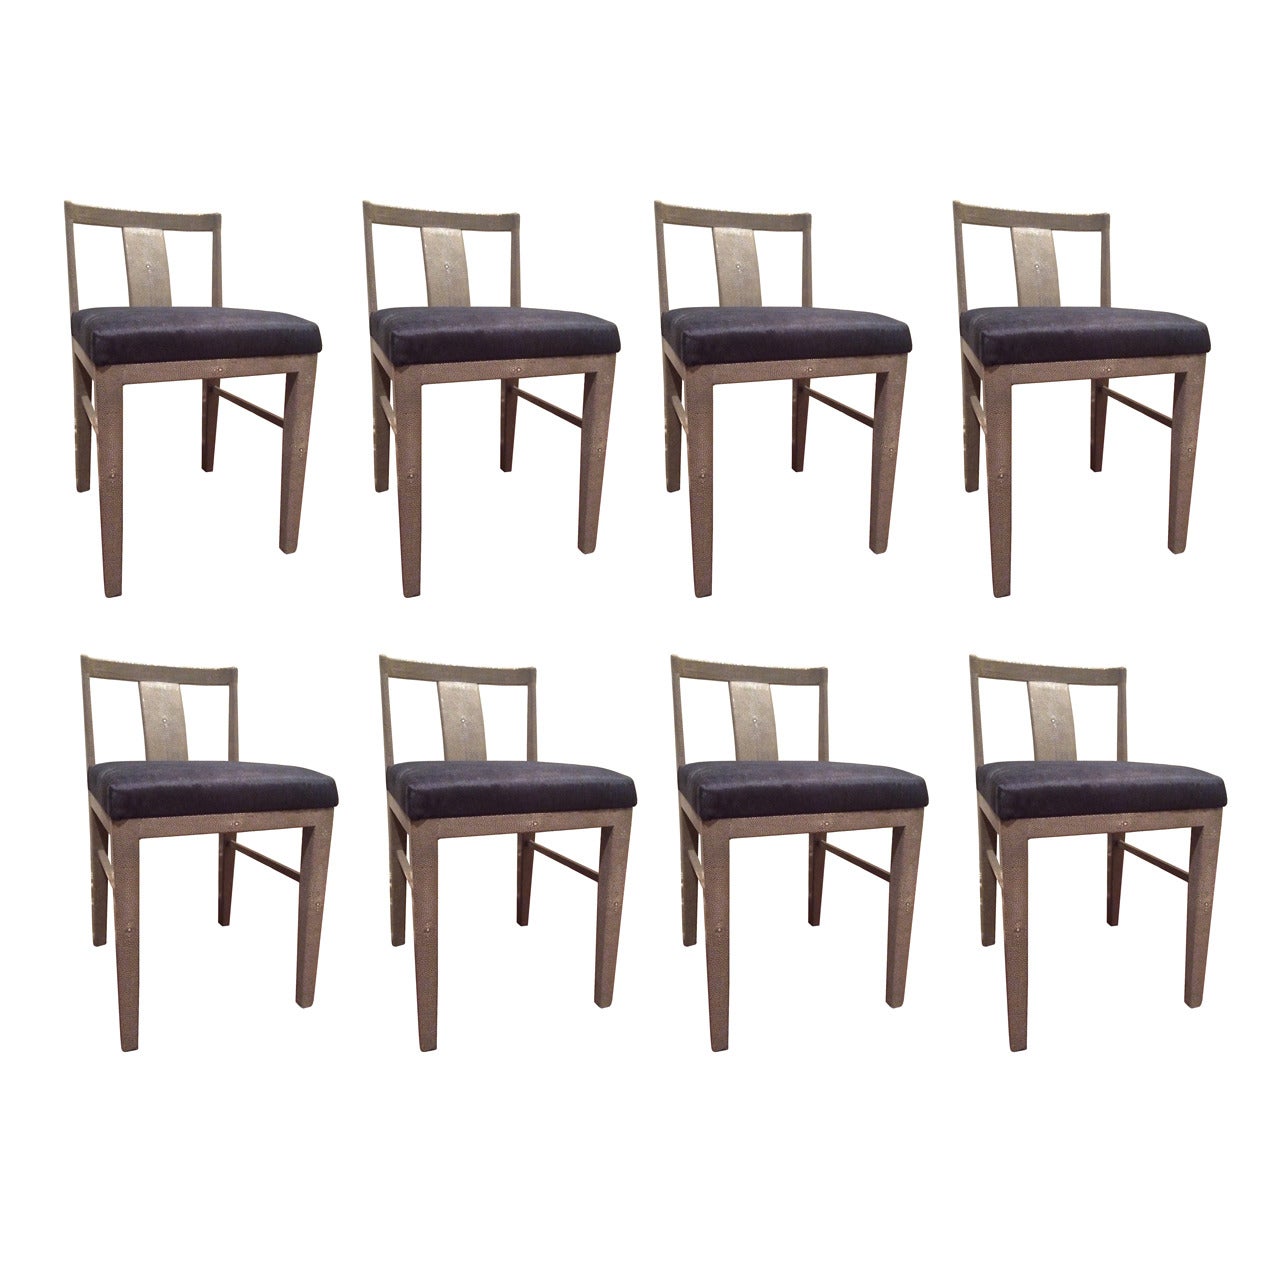 Set of Eight Shagreen Chairs with Pony Skin Upholstered Seats